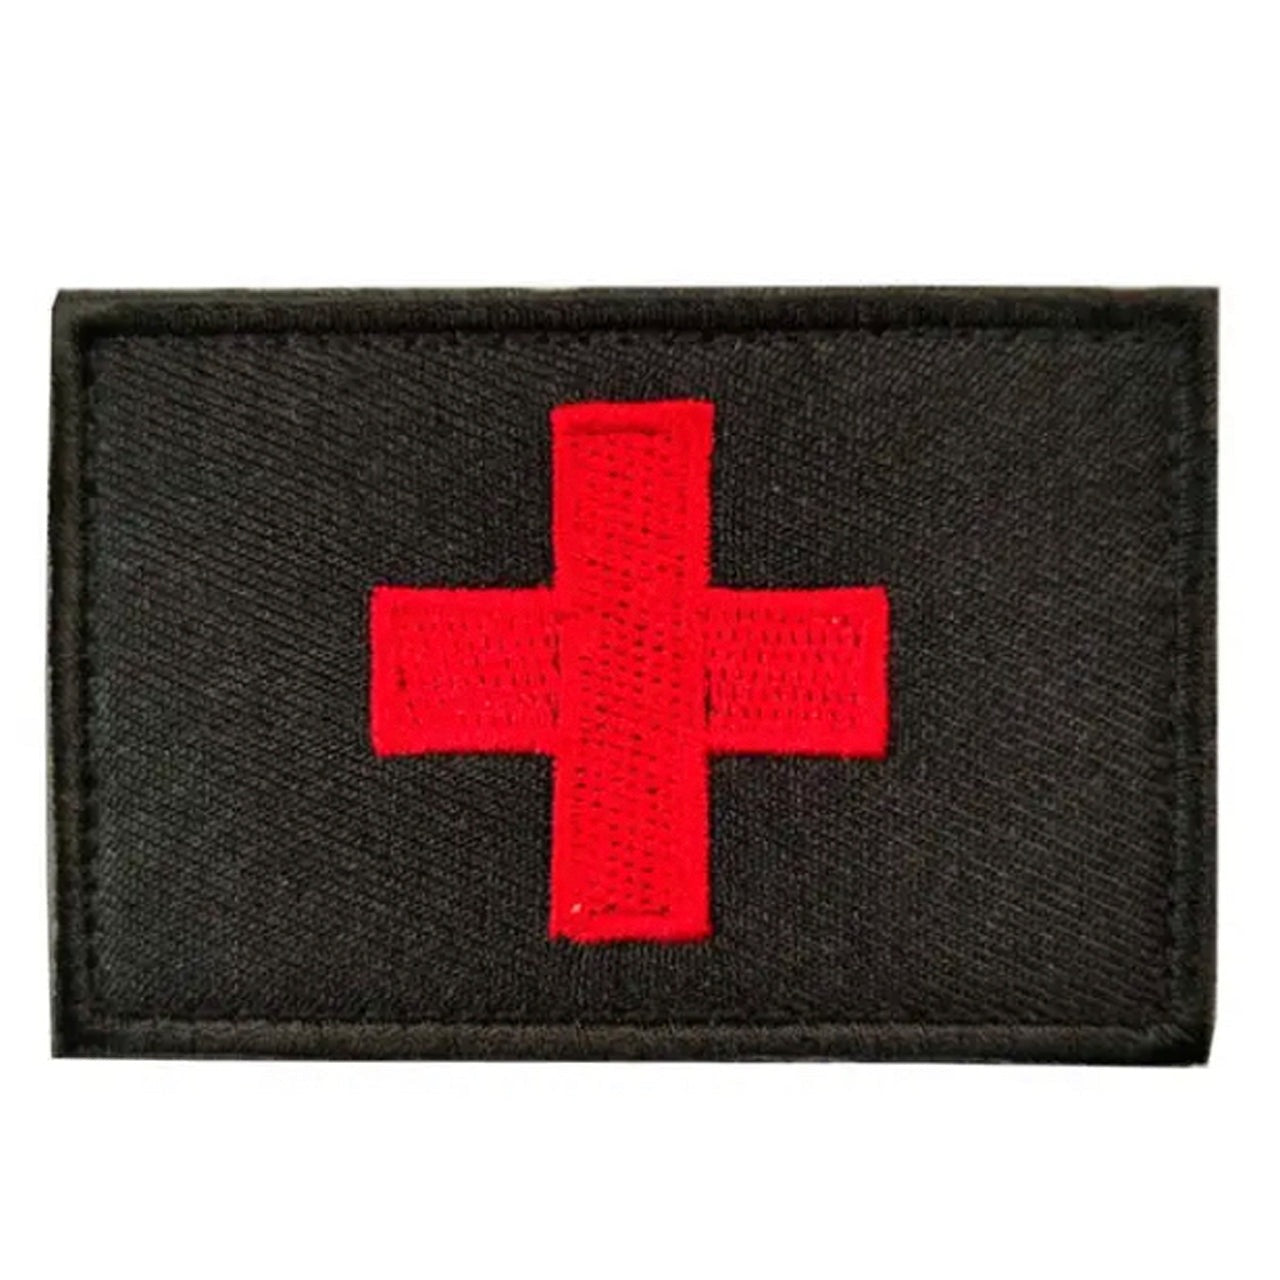 Revel in the power of Medical Patch First Aid's Black Patch Hook & Loop! This 8x5cm HOOK AND LOOP-backed patch provides you with the convenience you need - its velcro-backed construction is both simple and reliable. Count on Medical Patch First Aid's Black Patch Hook & Loop for added security and assurance! www.moralepatches.com.au